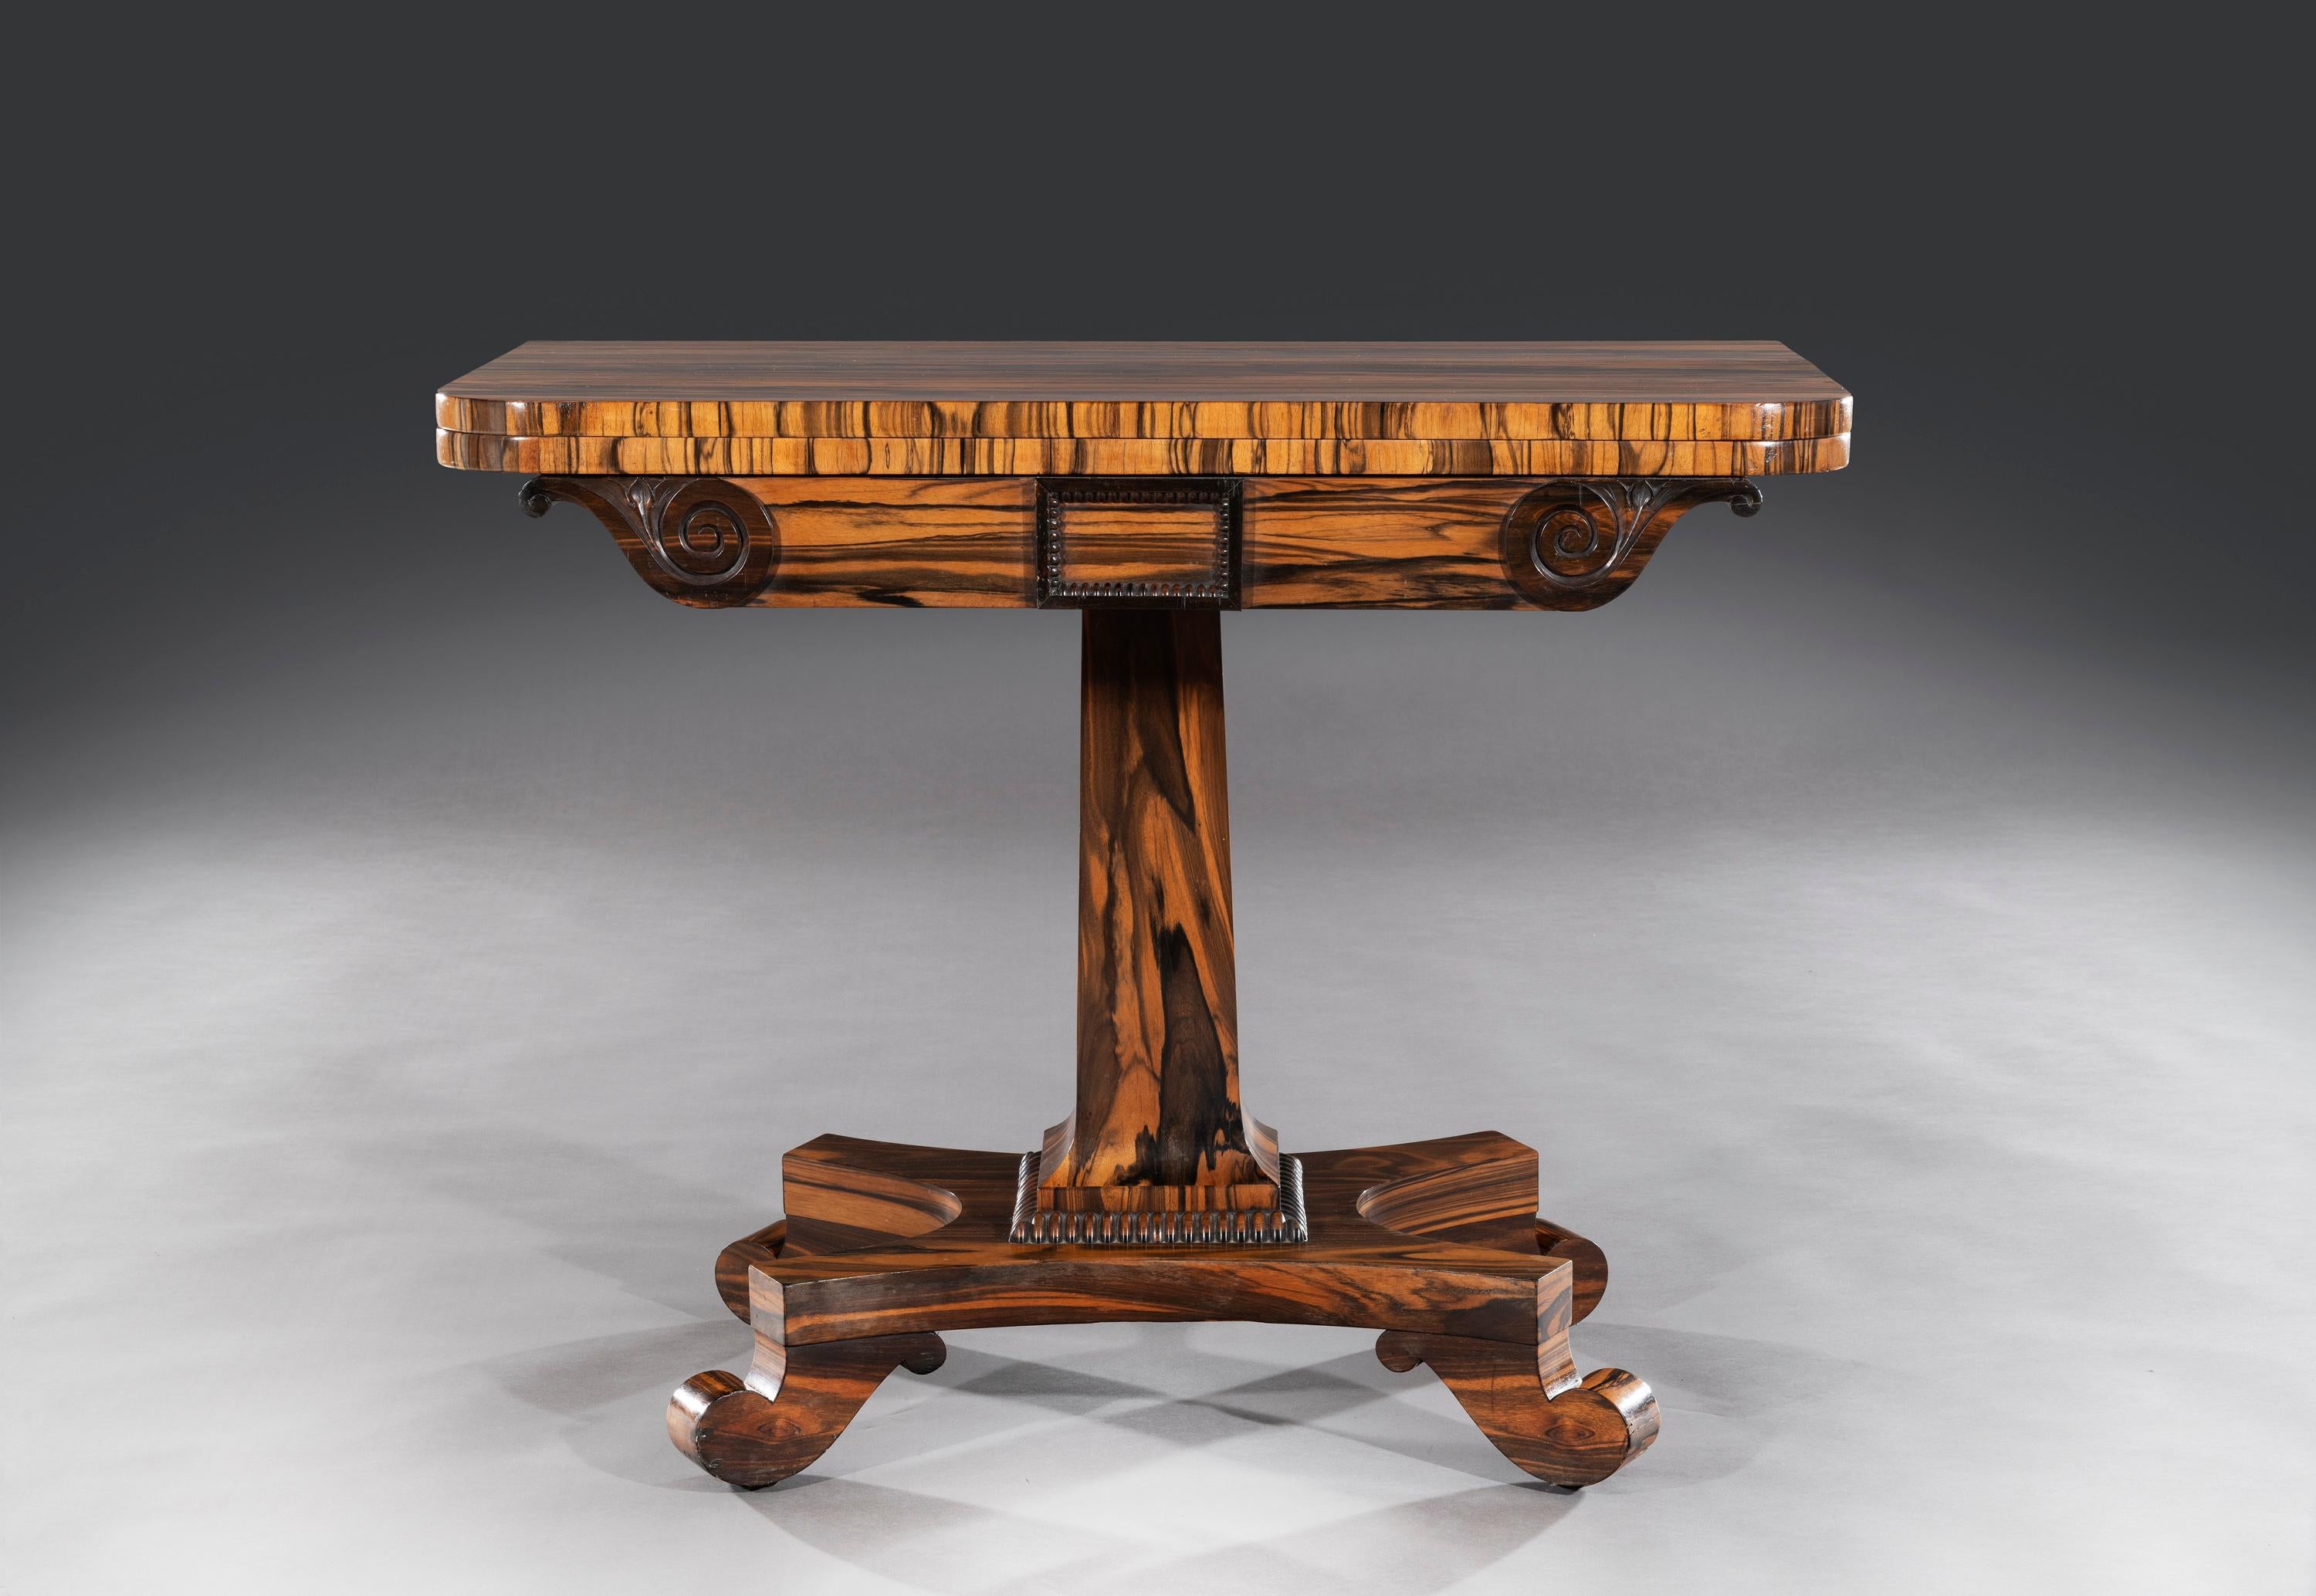 English Early 19th Century Regency Period Coromadel 'Calamander' Fold-Over Card Table For Sale